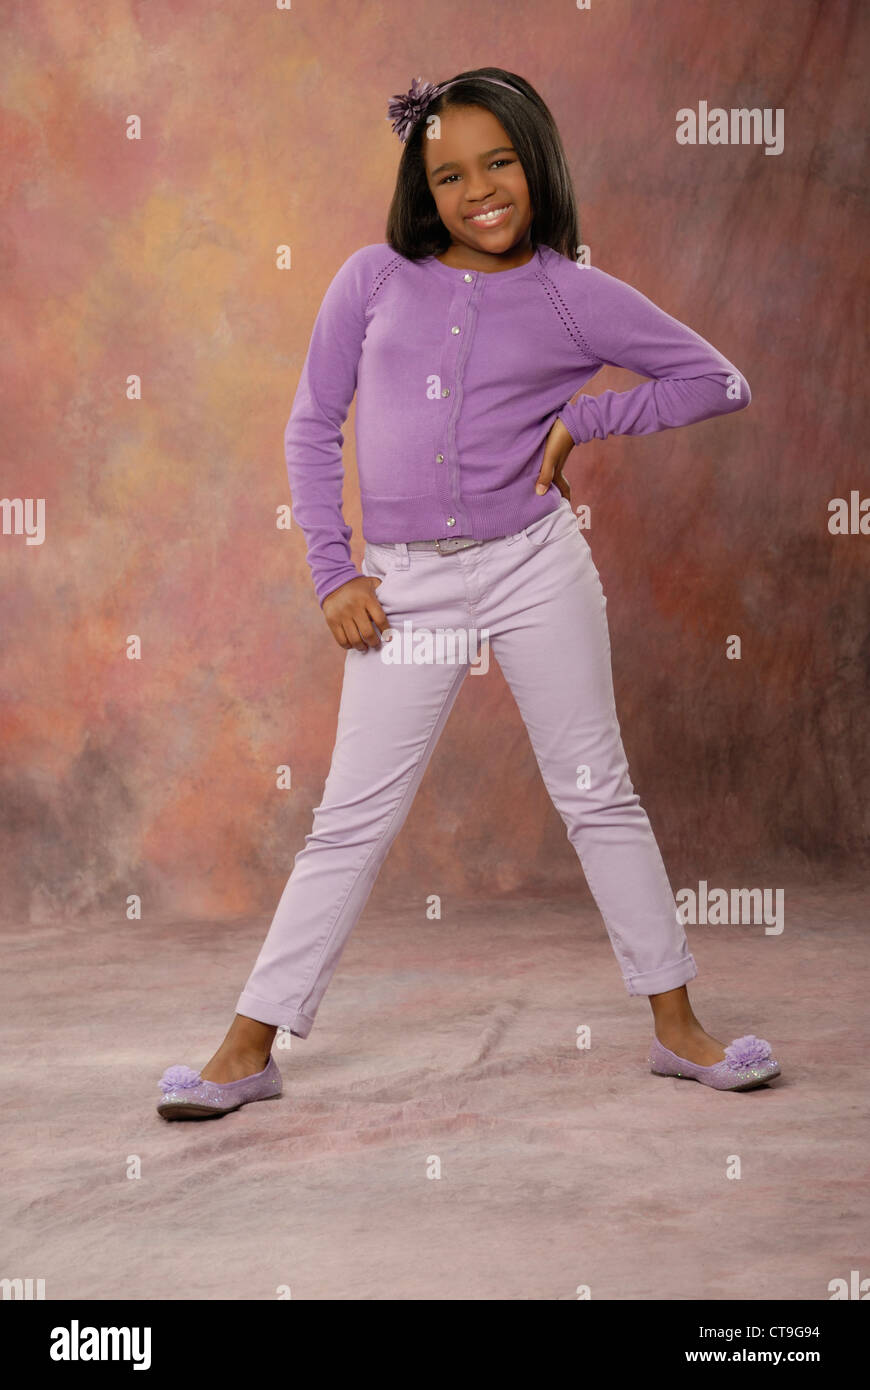 Cute ten year old African American wearing a casual purple outfit Stock  Photo - Alamy